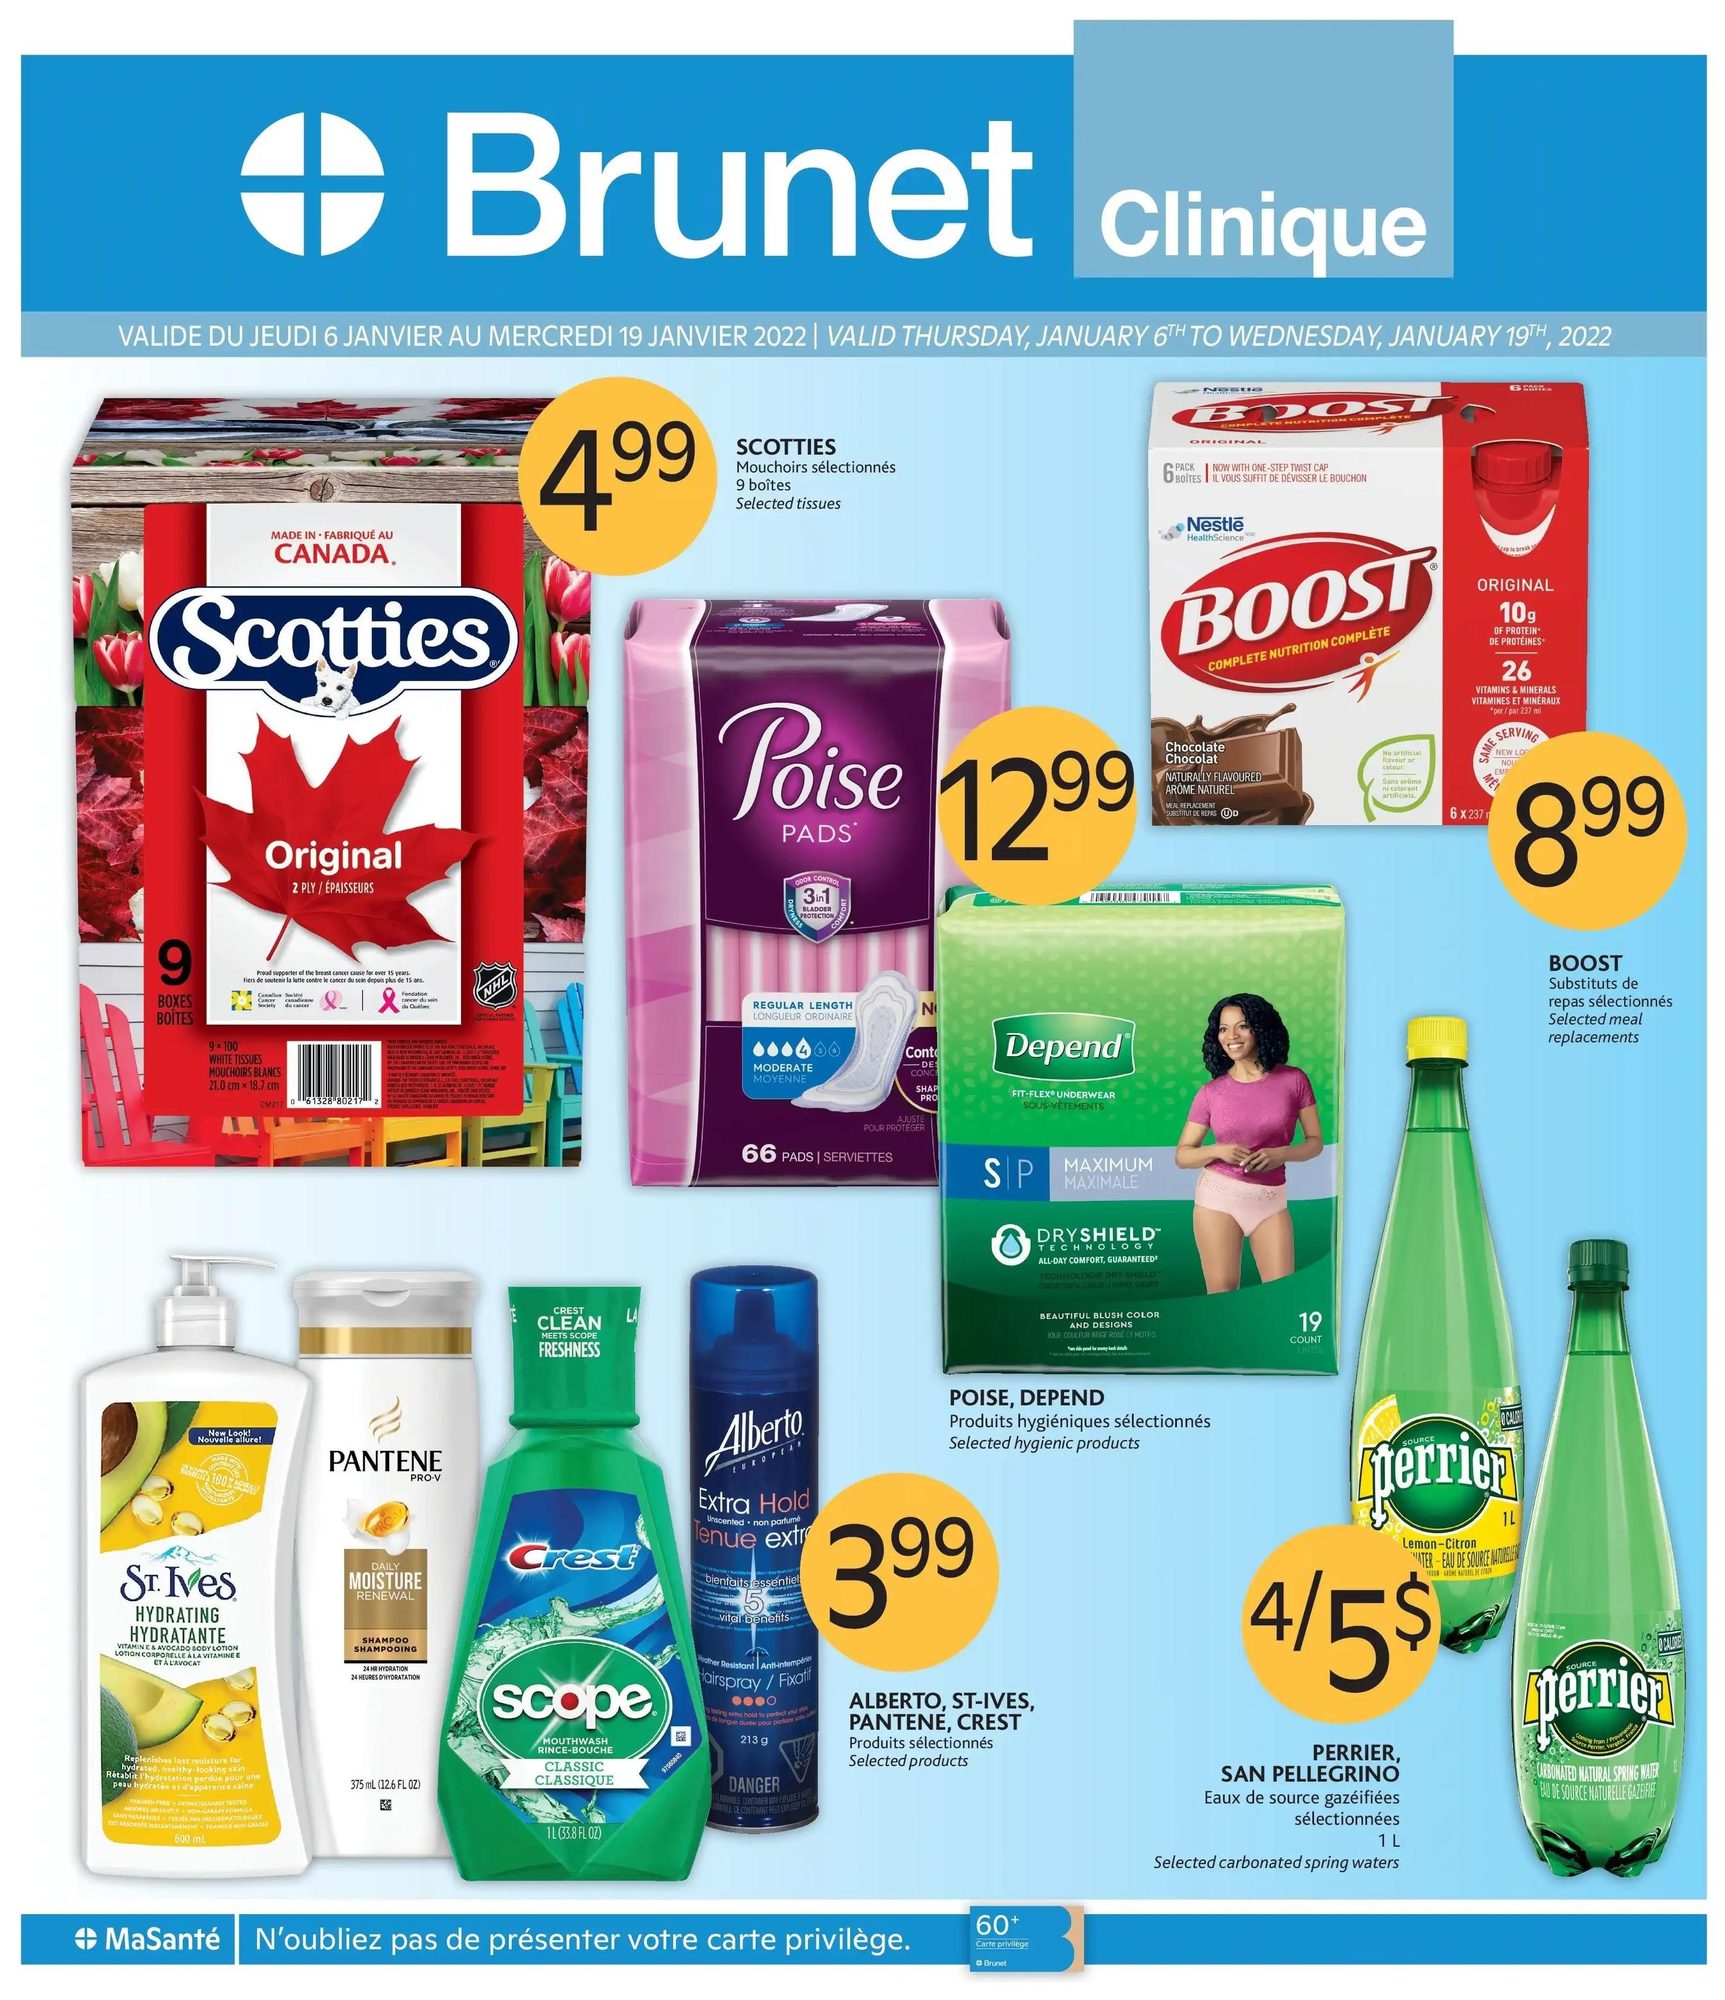 Brunet - Clinical Specials - 2 Weeks of Savings